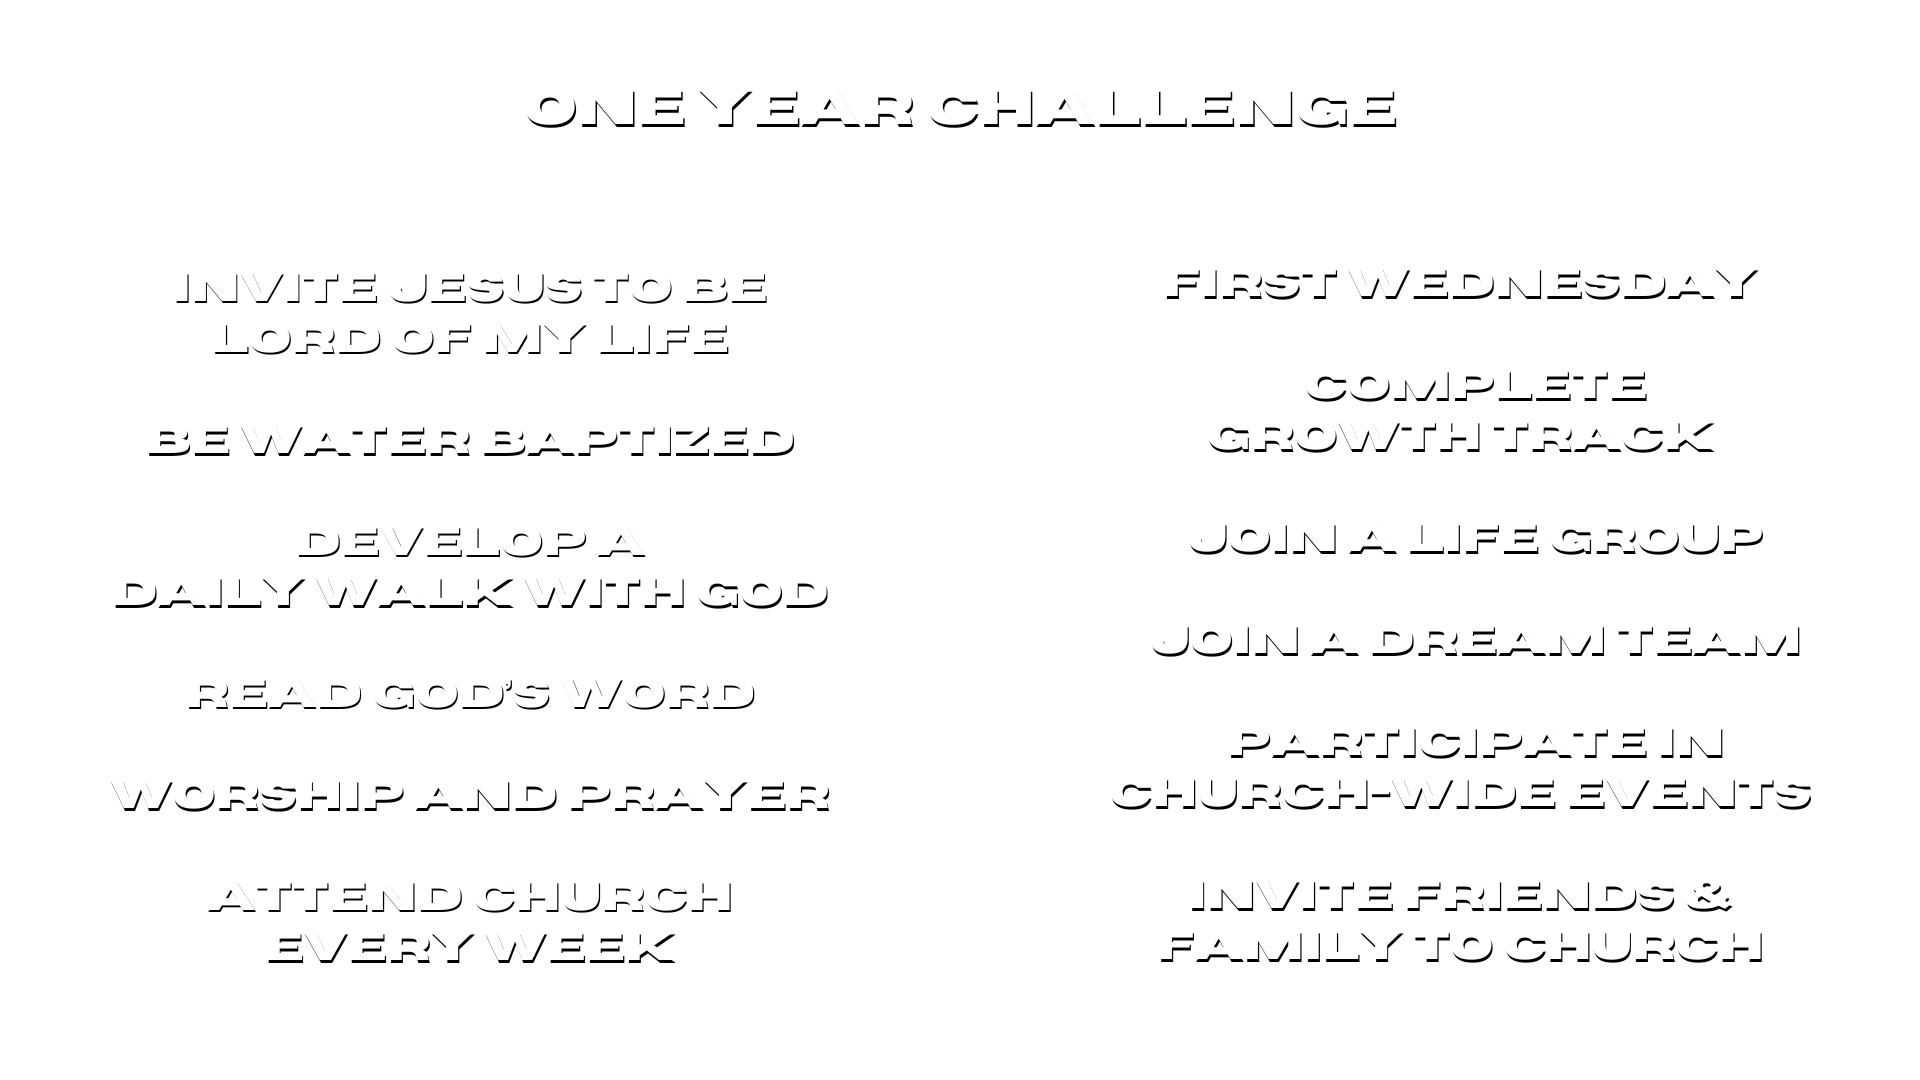 First Wednesday  Complete Growth Track  Join a life Group  Join a Dream Team  Participate in Church-Wide Events  Invite Friends & Family to Church (2)